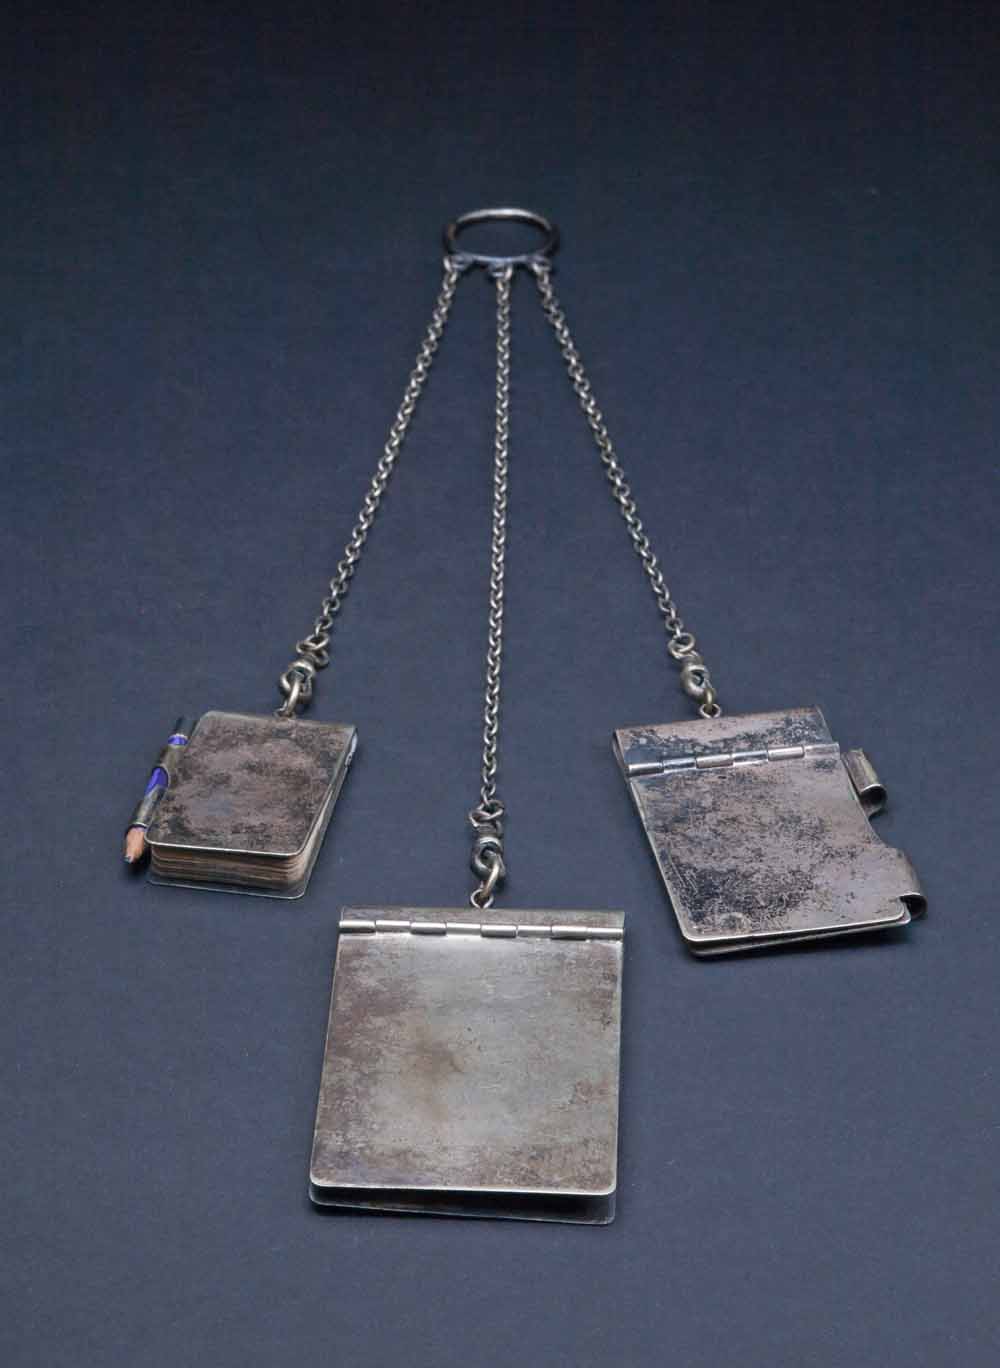 Belle's silver chatelaine - three tiny notebooks and pencil on silver chains